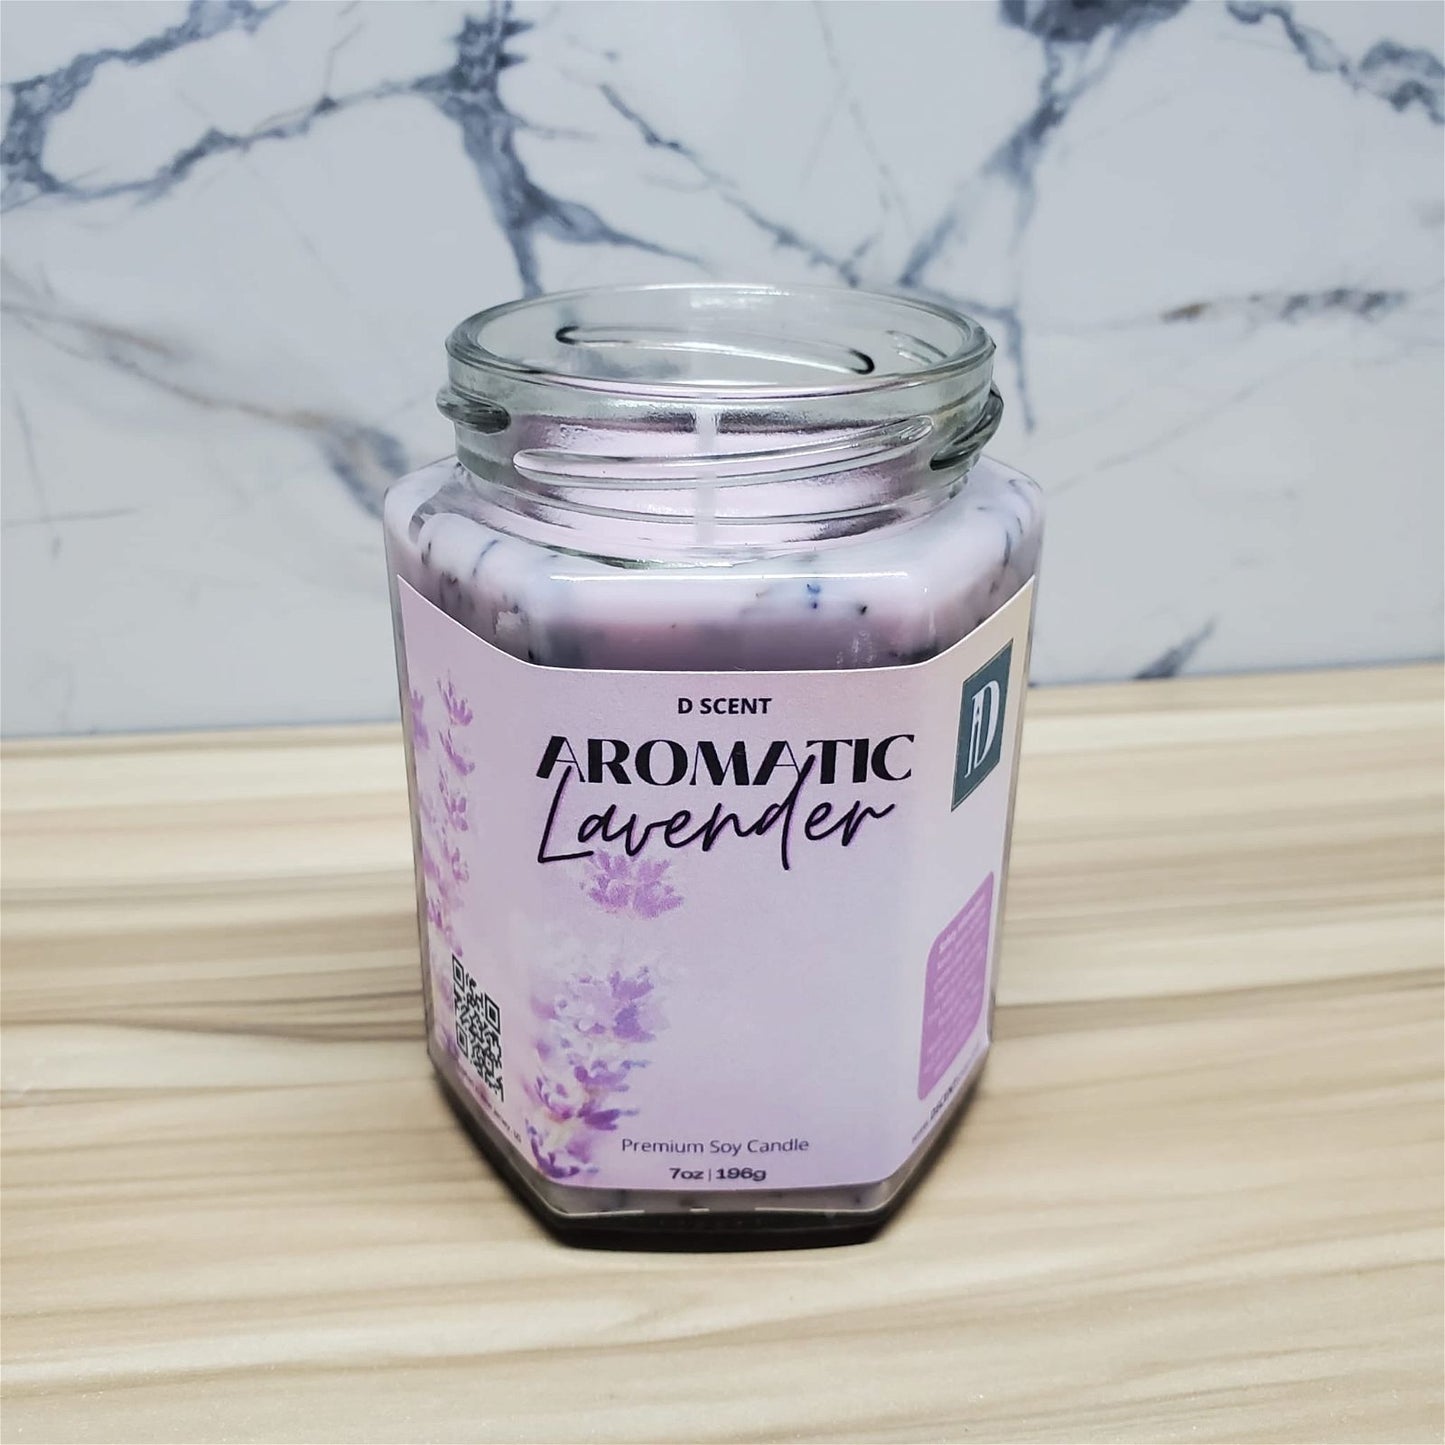 AROMATIC lavender Soy Candle | Large Hex Jar - D SCENT 